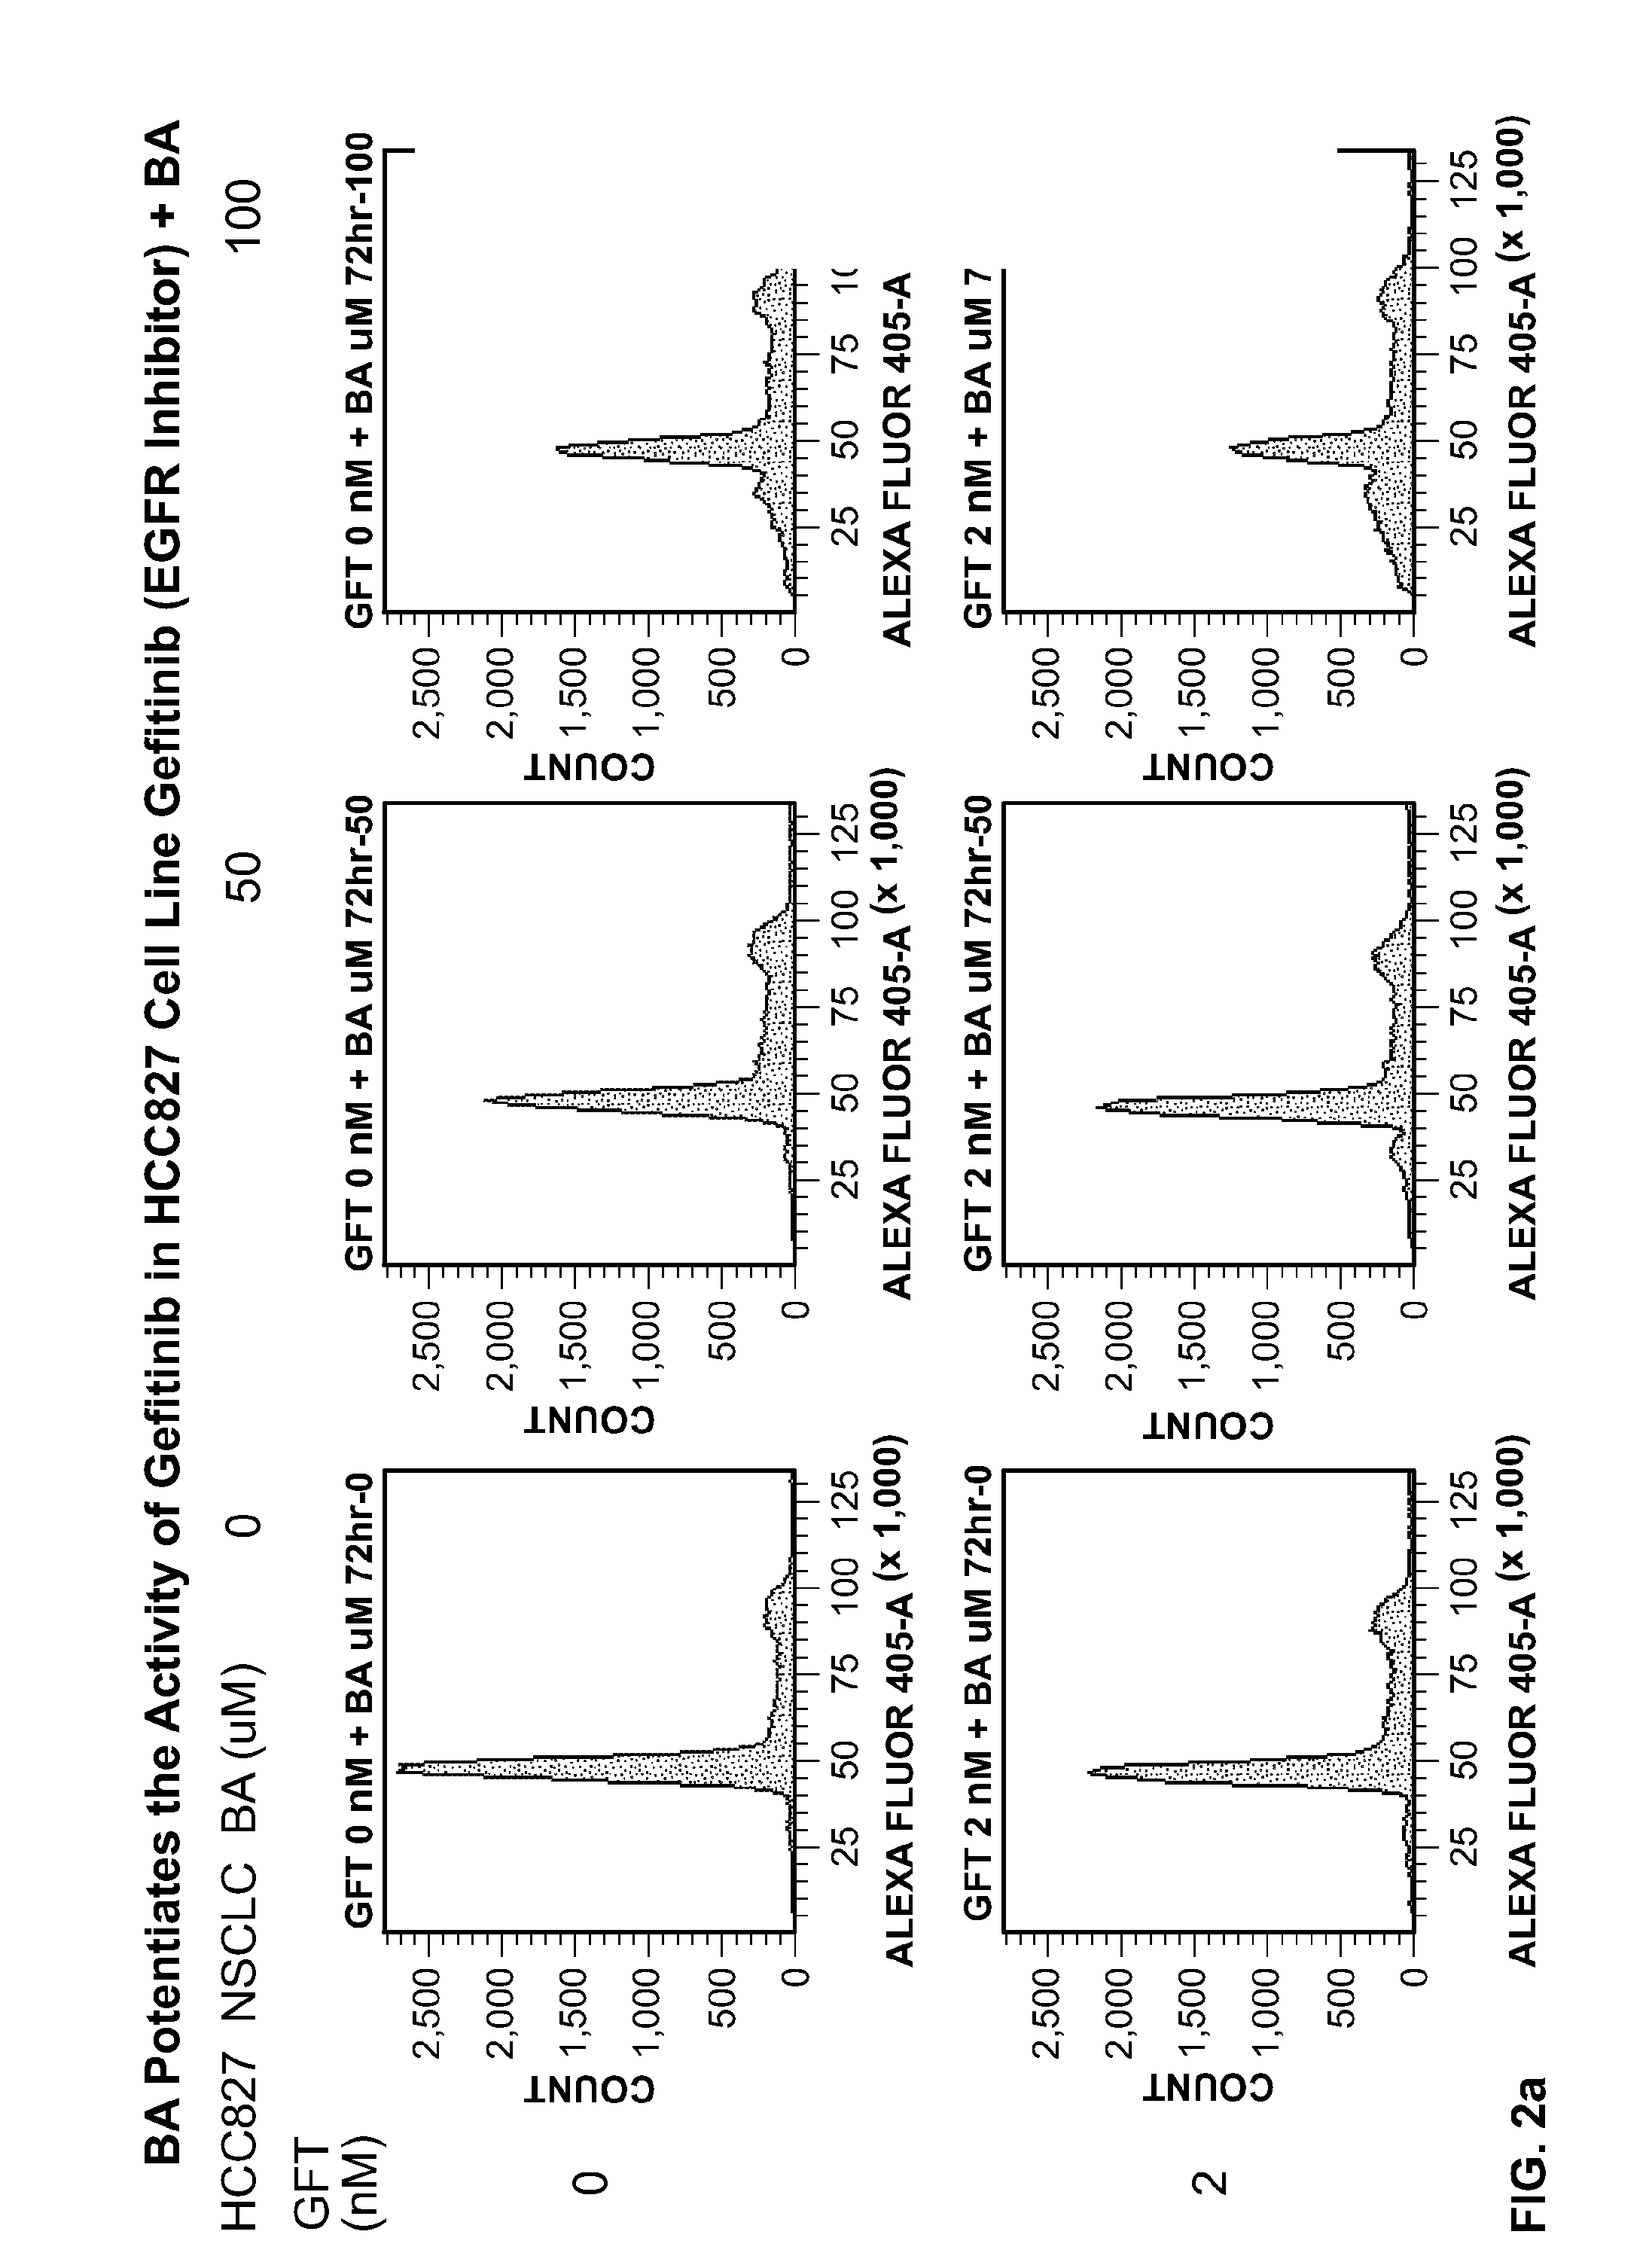 Treatment of lung cancer with a nitrobenzamide compound in combination with a growth factor inhibitor